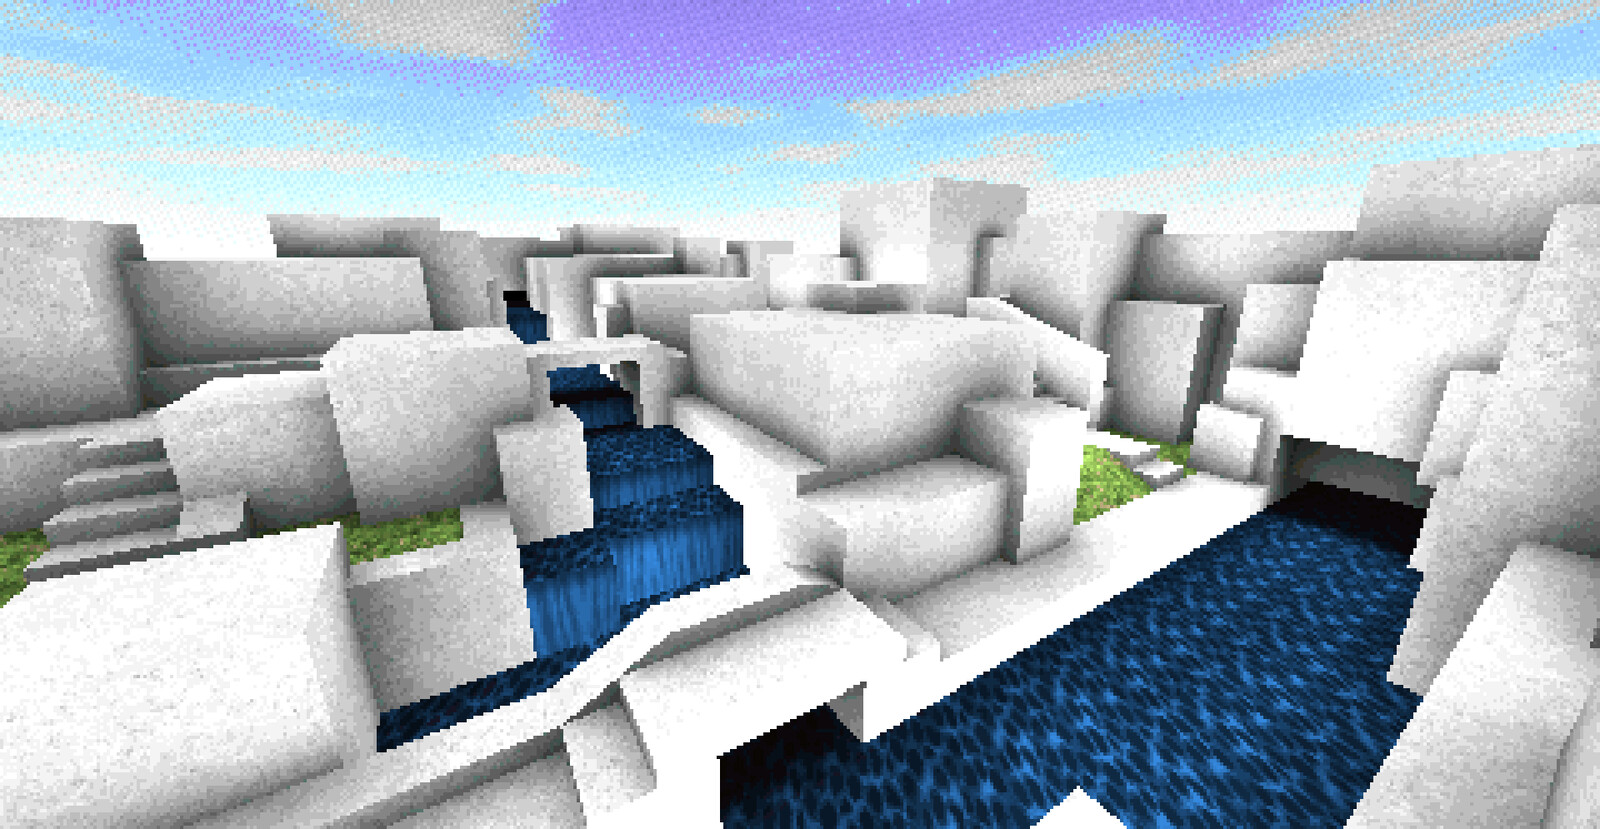 The first environment I created for the game. This was intended to be part of the game's hub world.